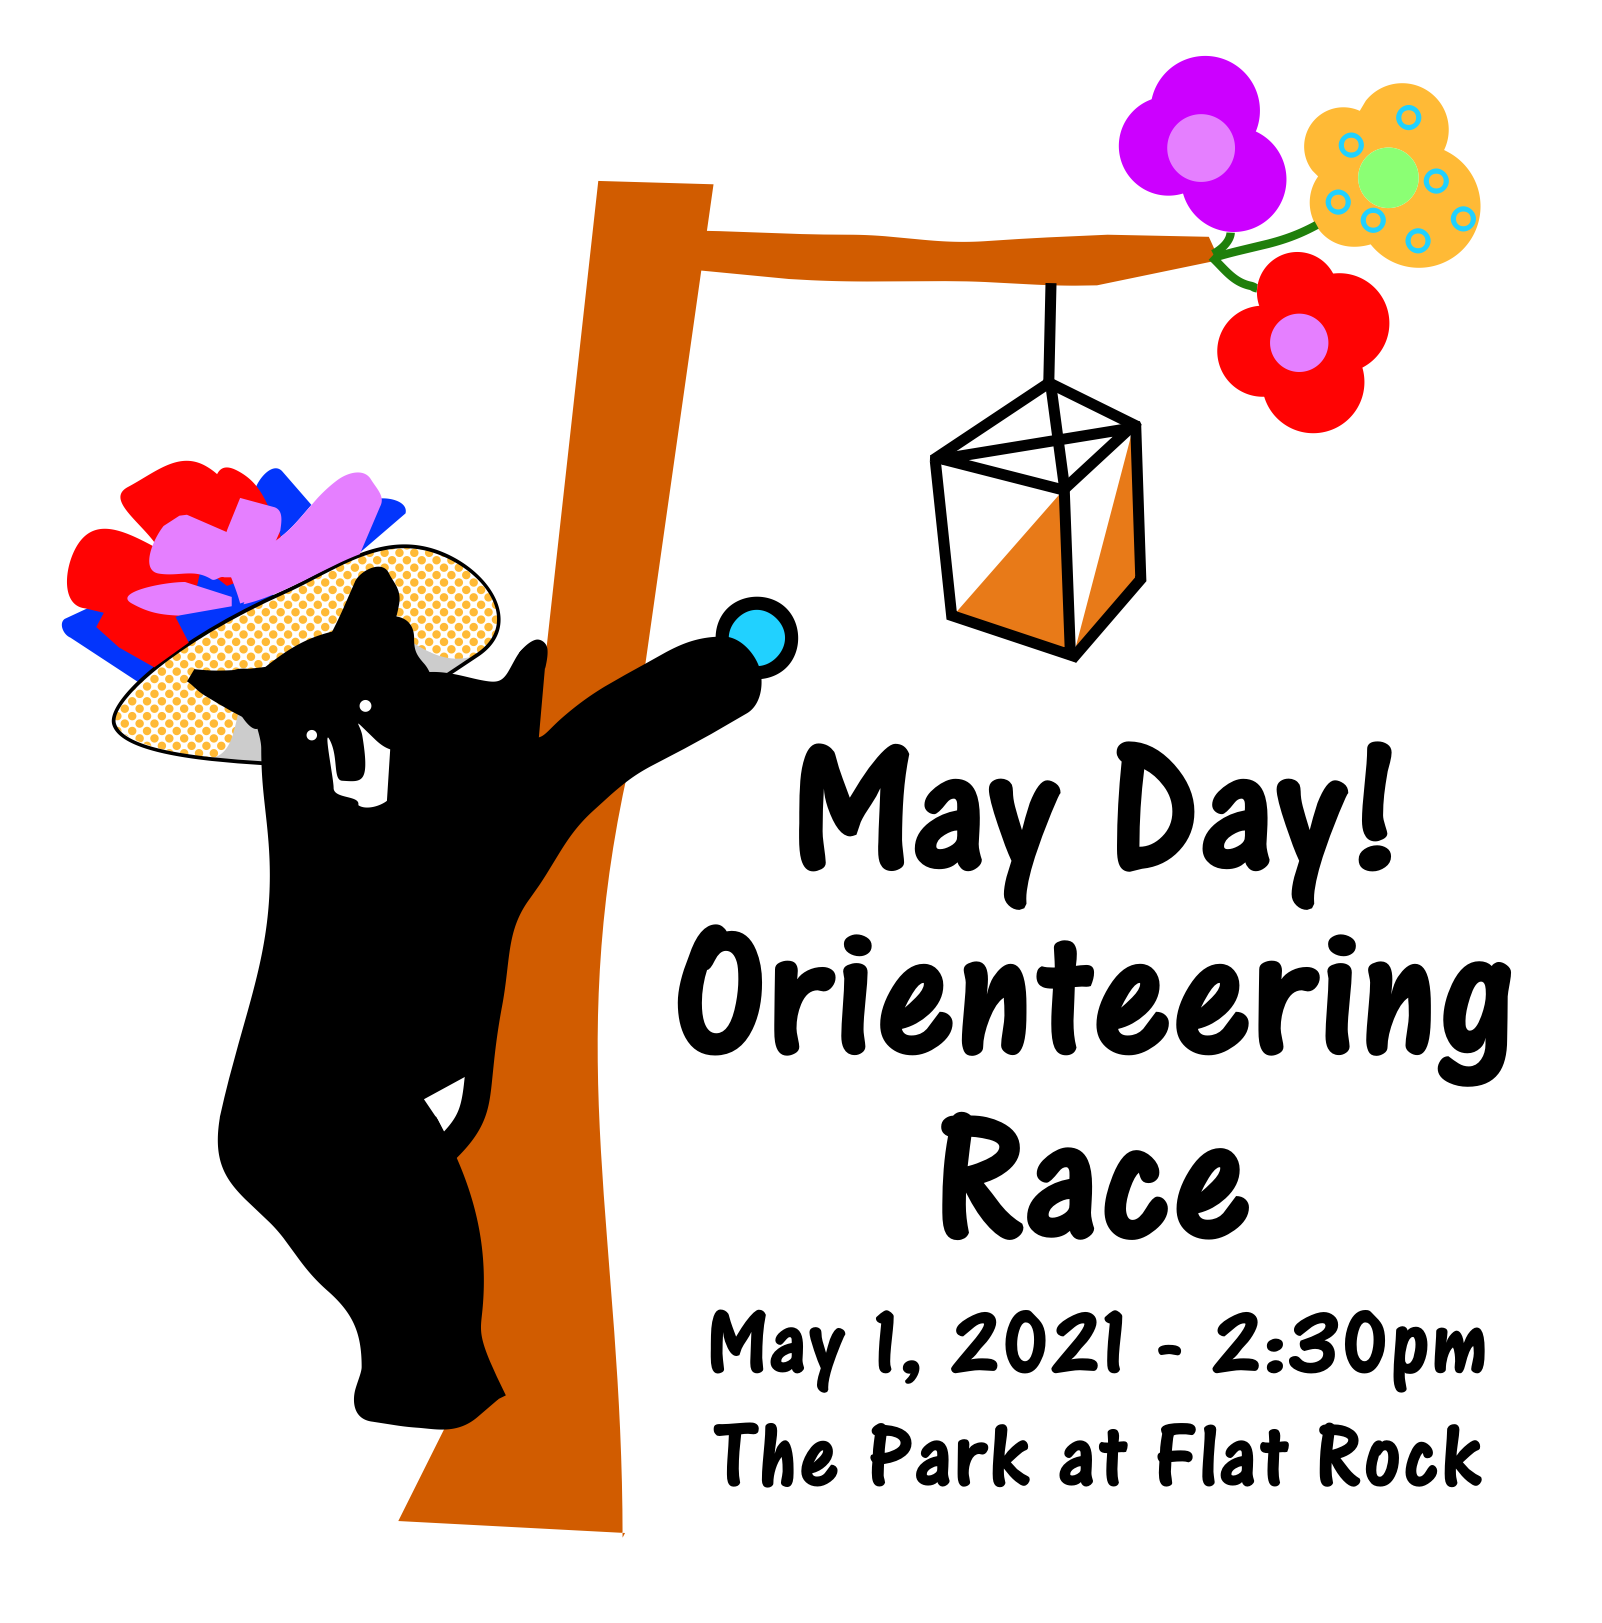 May Day Orienteering Race